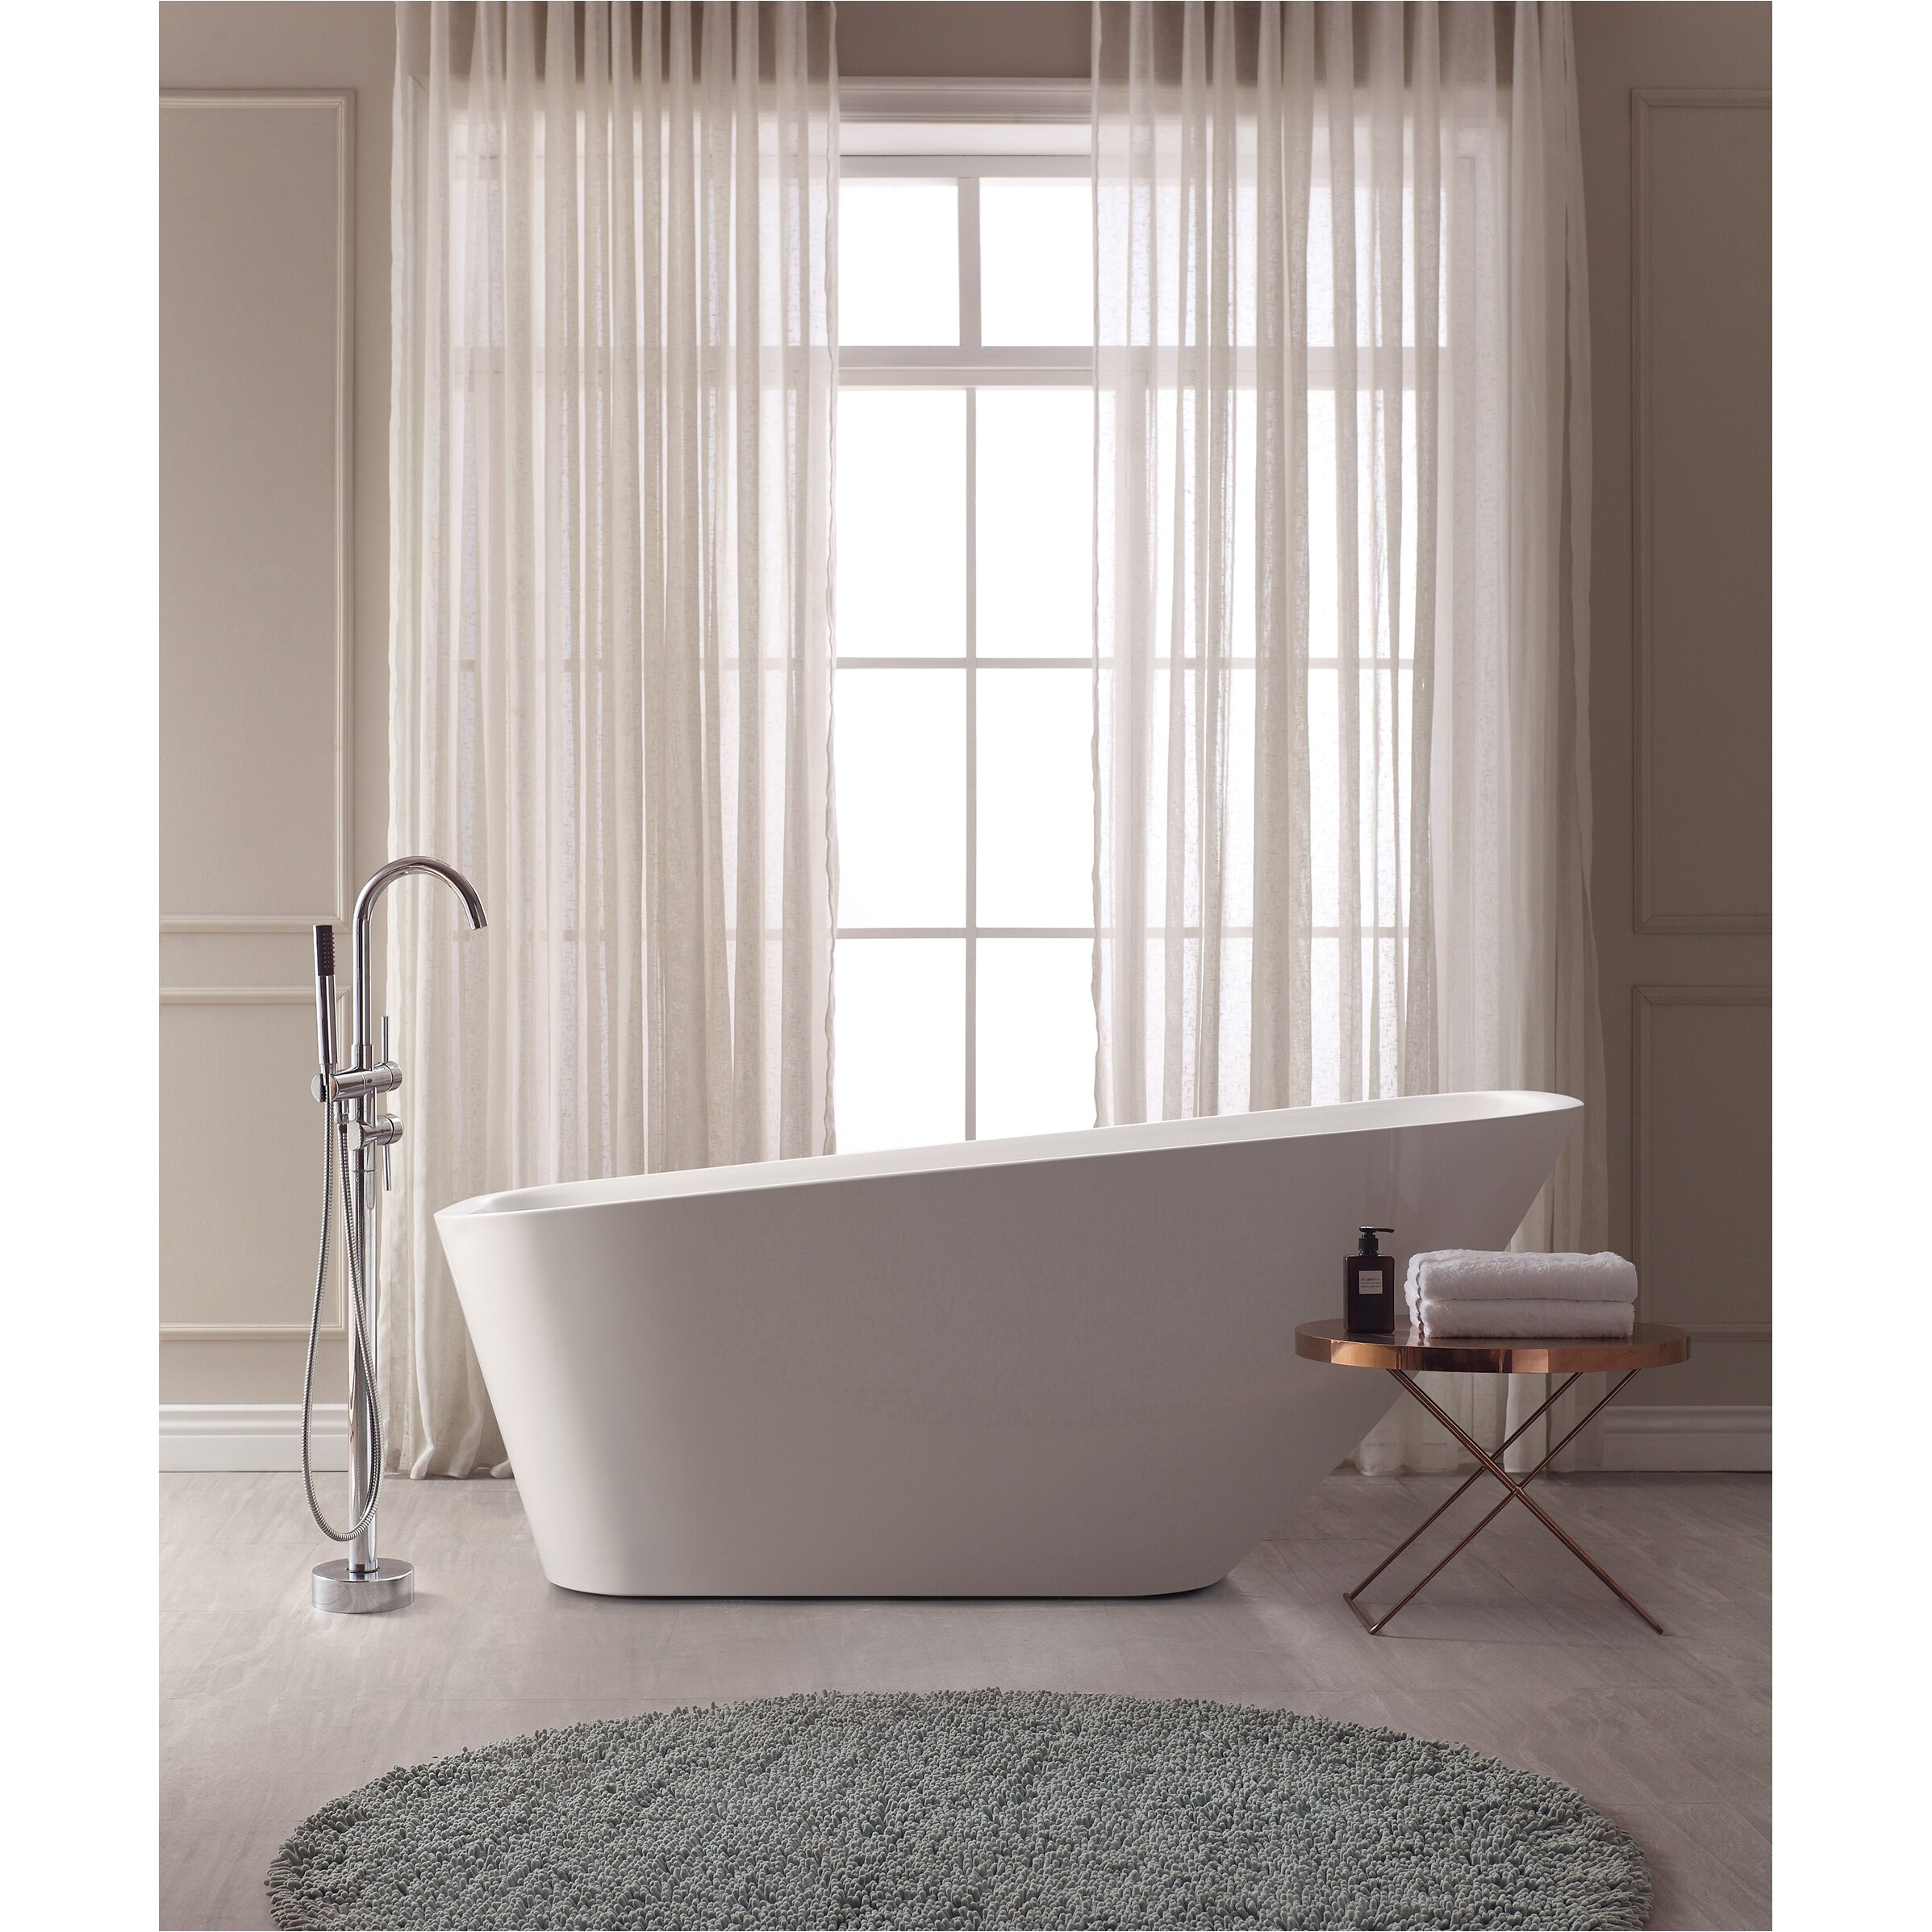 Avanity 66 7 Free Standing Acrylic Soaking Tub with Rear Drain Pop Up Drain Assembly and Overflow ABT1529 GL AVN1545